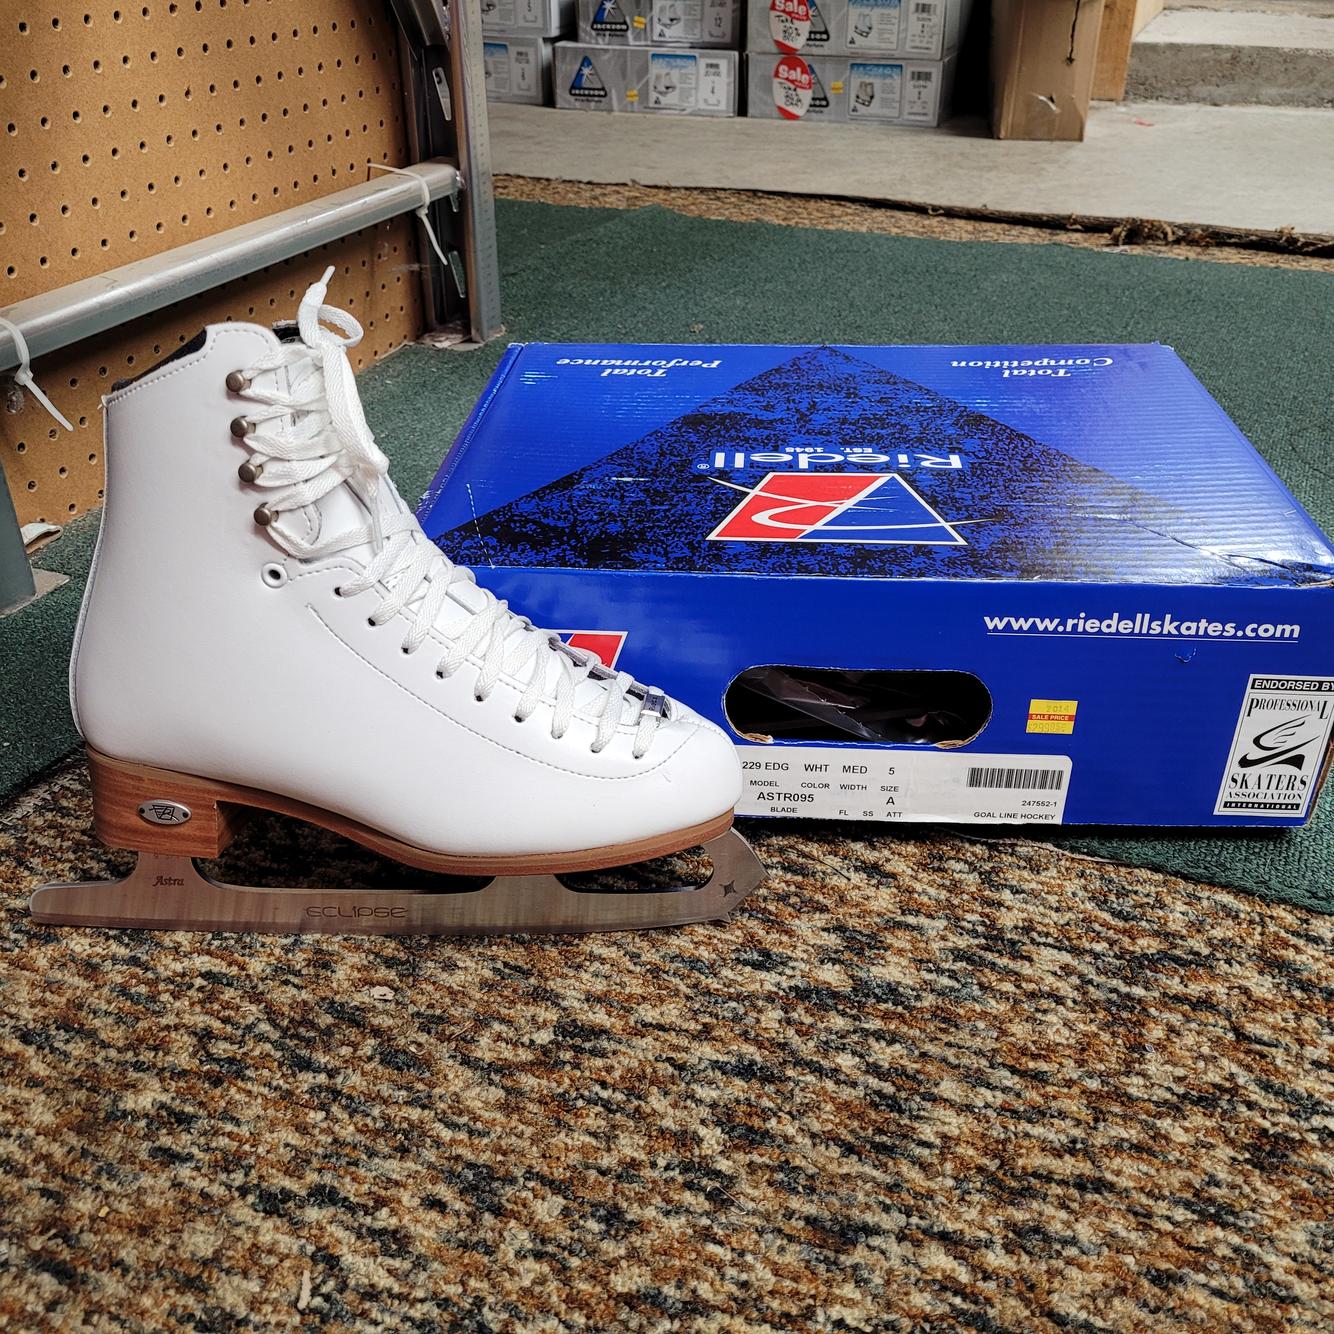 Details about   Riedell model 229 Figure Skates size 4 NEW 